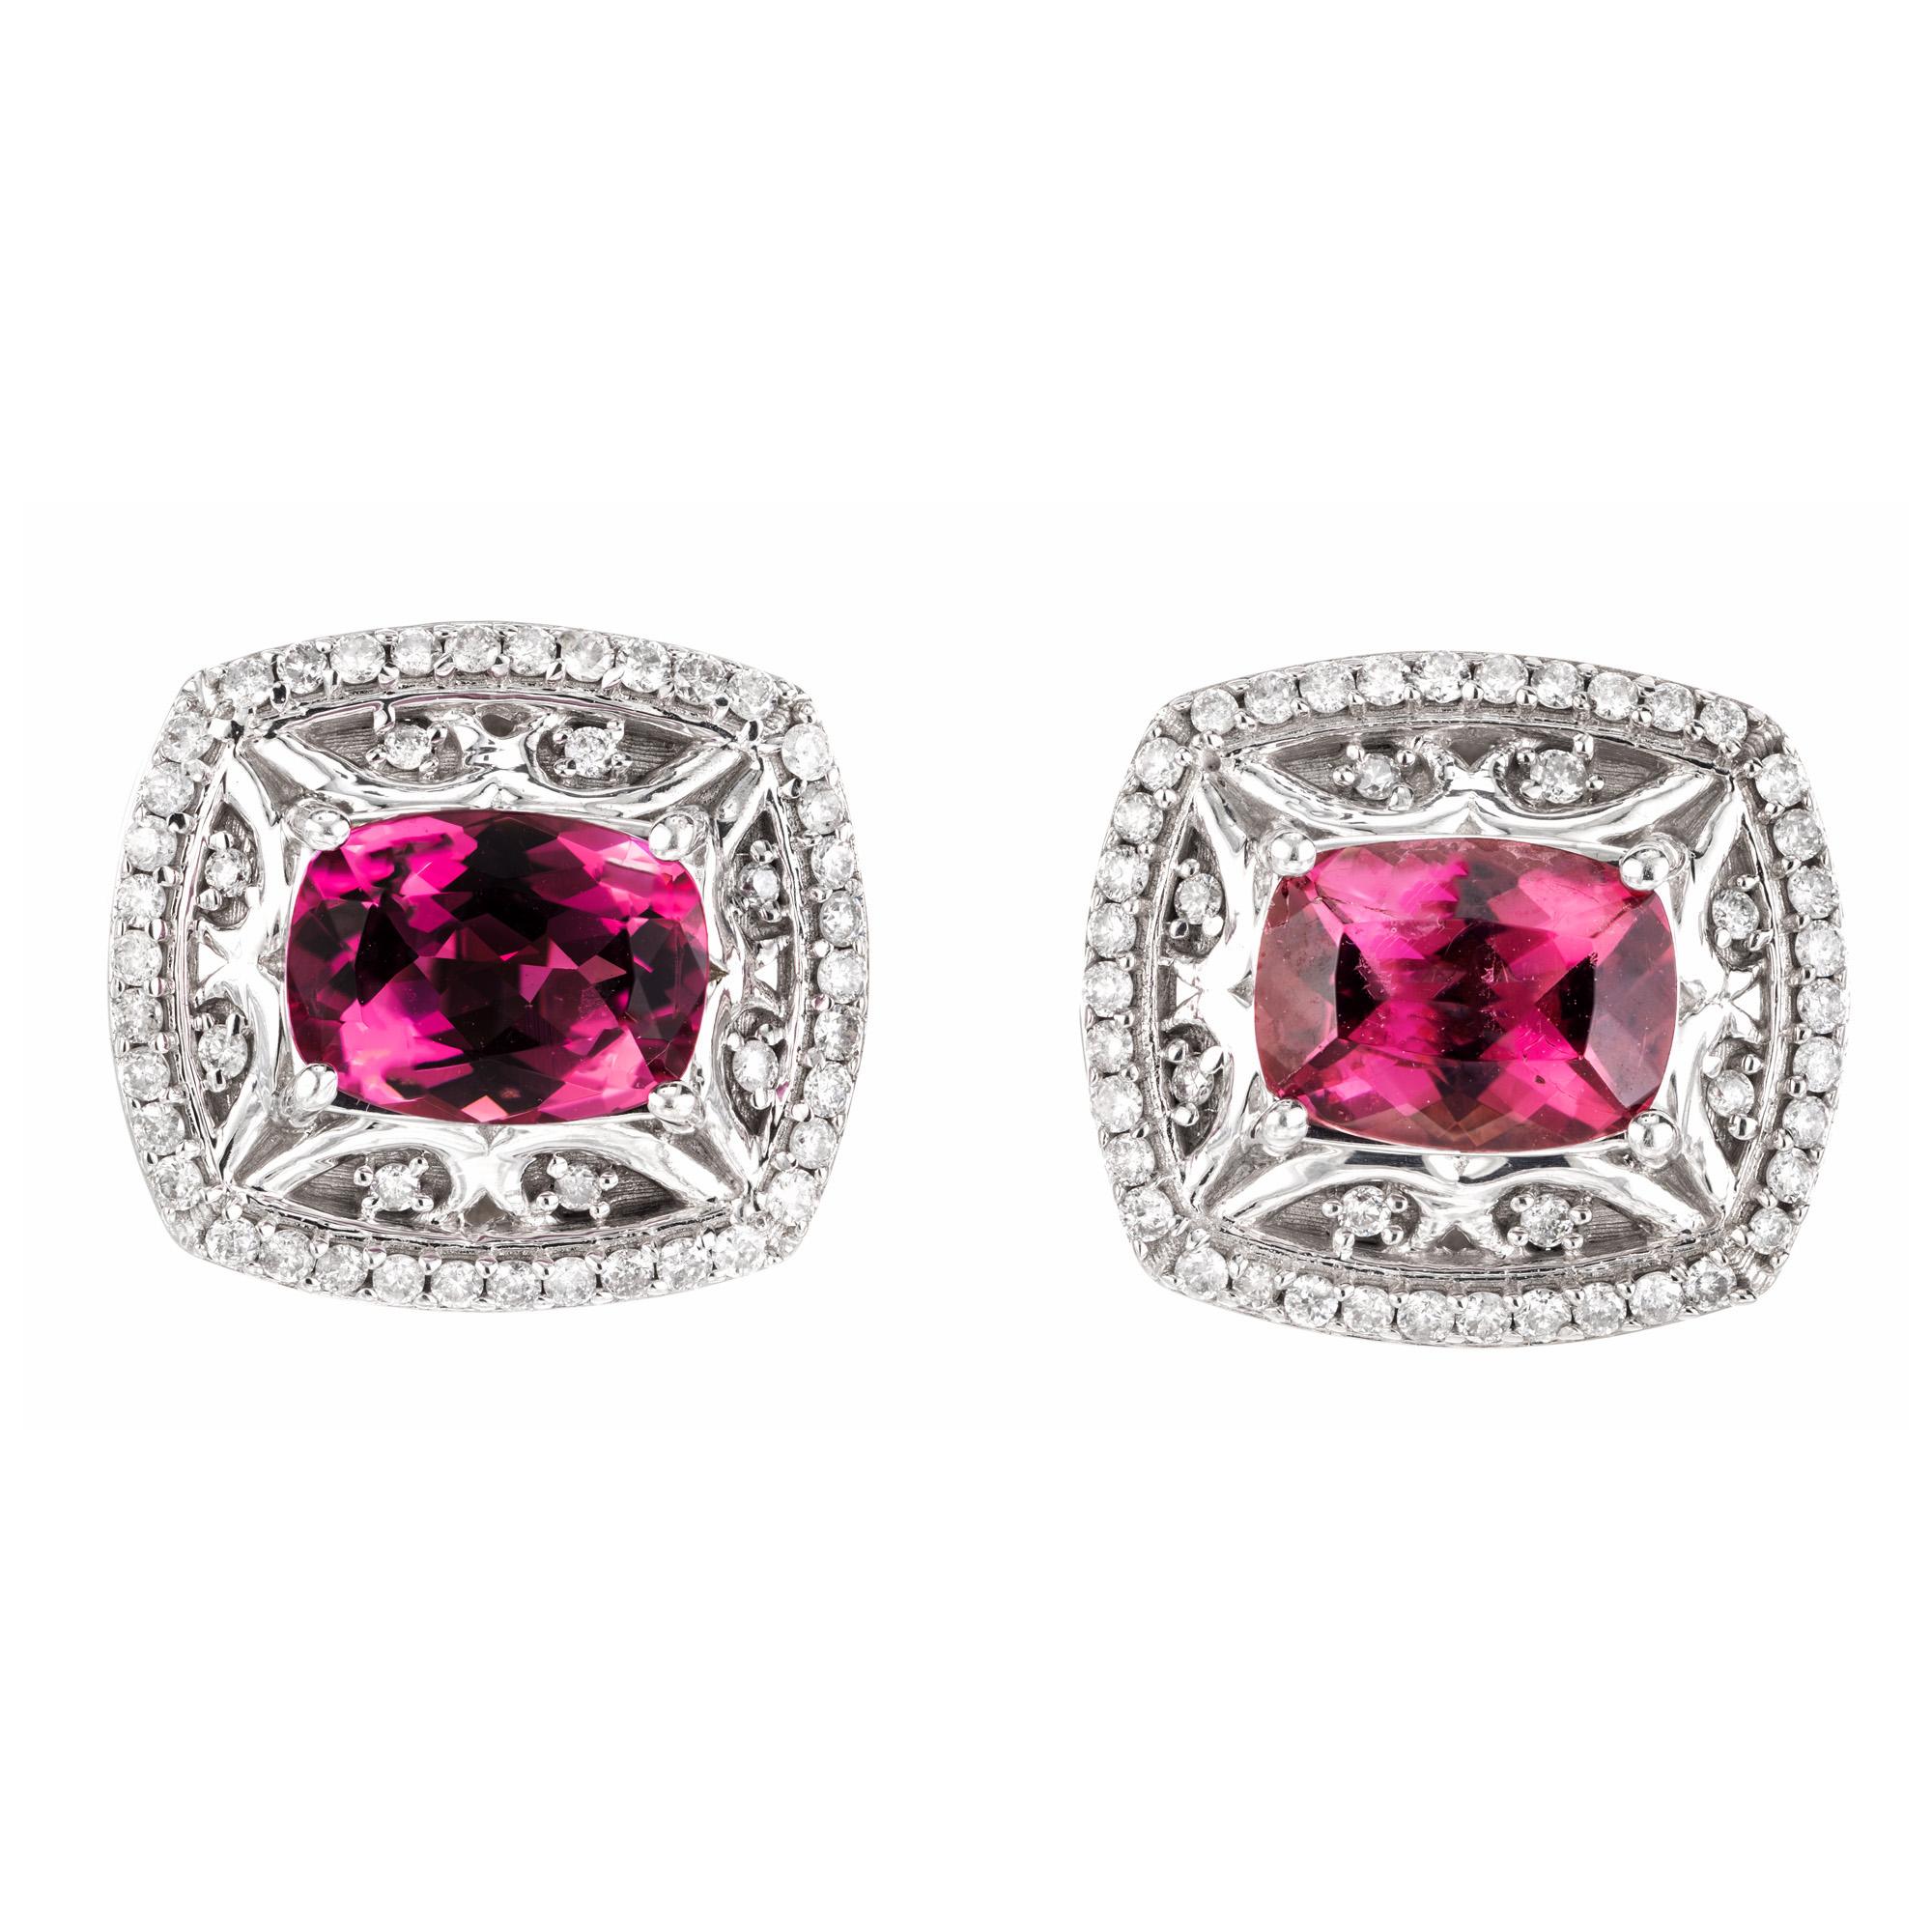 Elegant tourmaline and diamond earrings. These stunning earrings begin with 2 oval pink tourmalines totaling 2.40cts. Set in 14k white gold filigree settings with round full cut diamond halos. The captivating pink tourmaline gemstones exude a